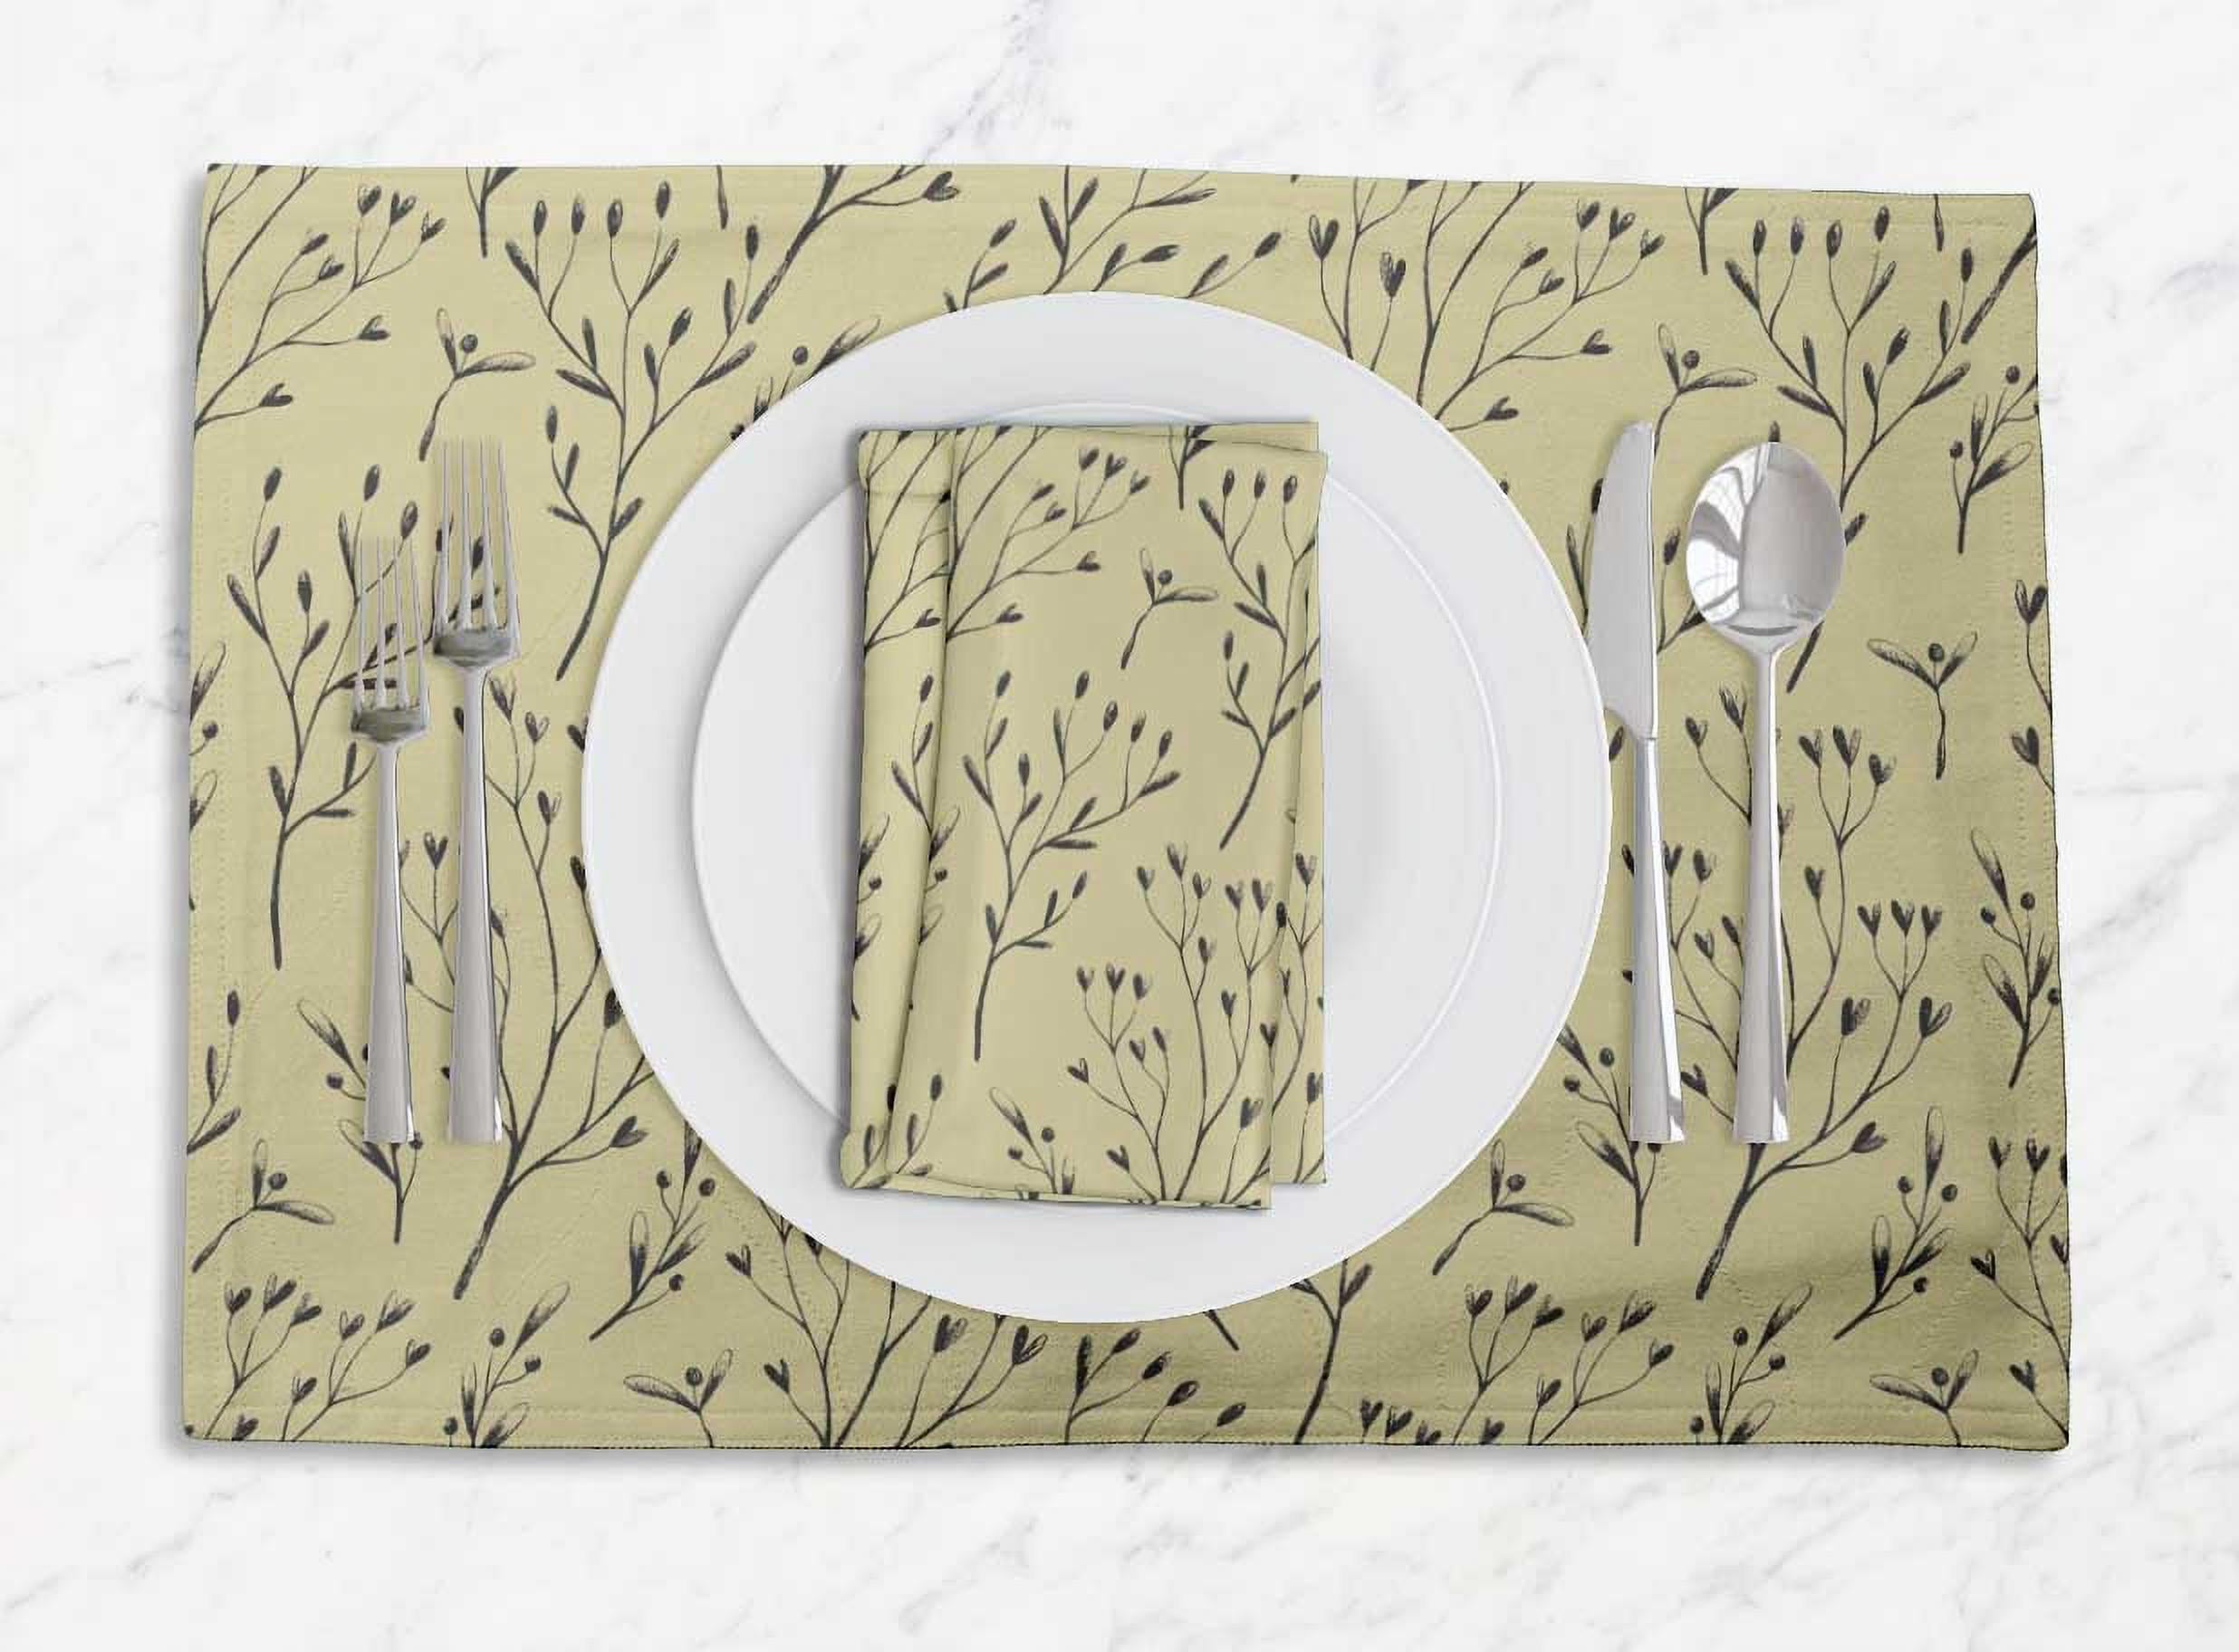 Details about   S4Sassy Hoya Kerrii Leaves Placemats With Napkins Dining Table Decor-LF-506A 